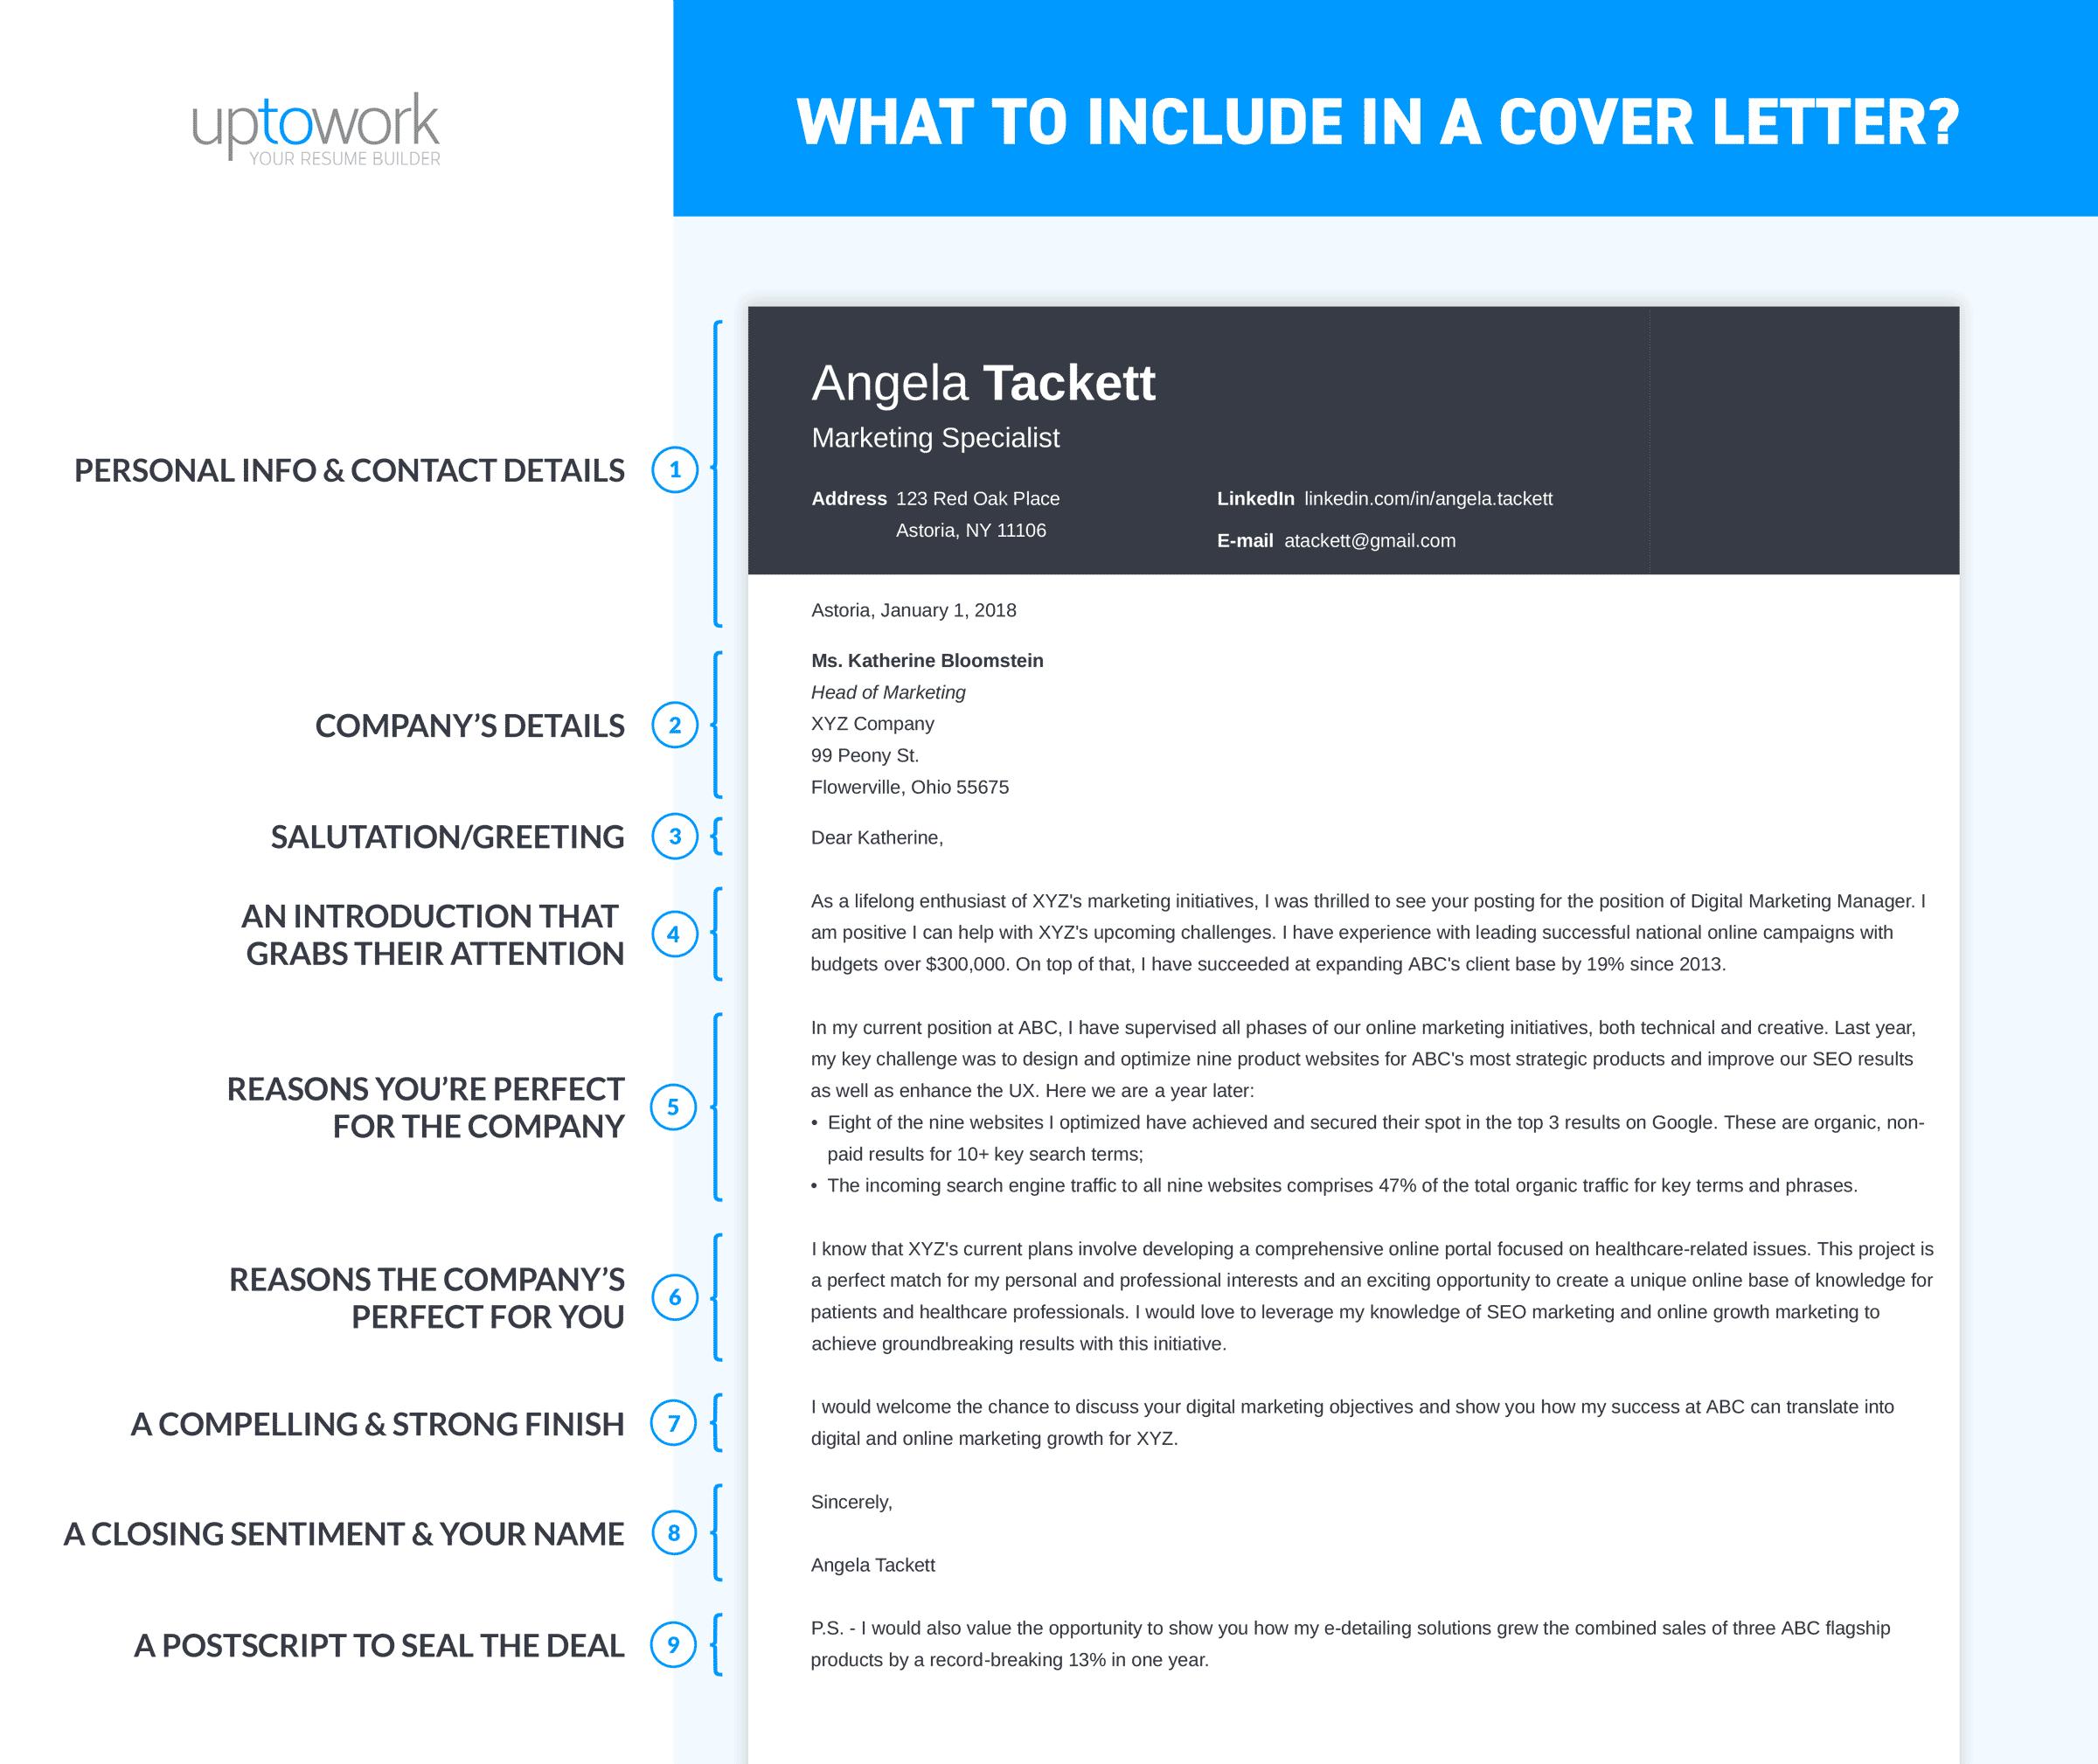 Should I Include Cover Letter from cdn-images.zety.com